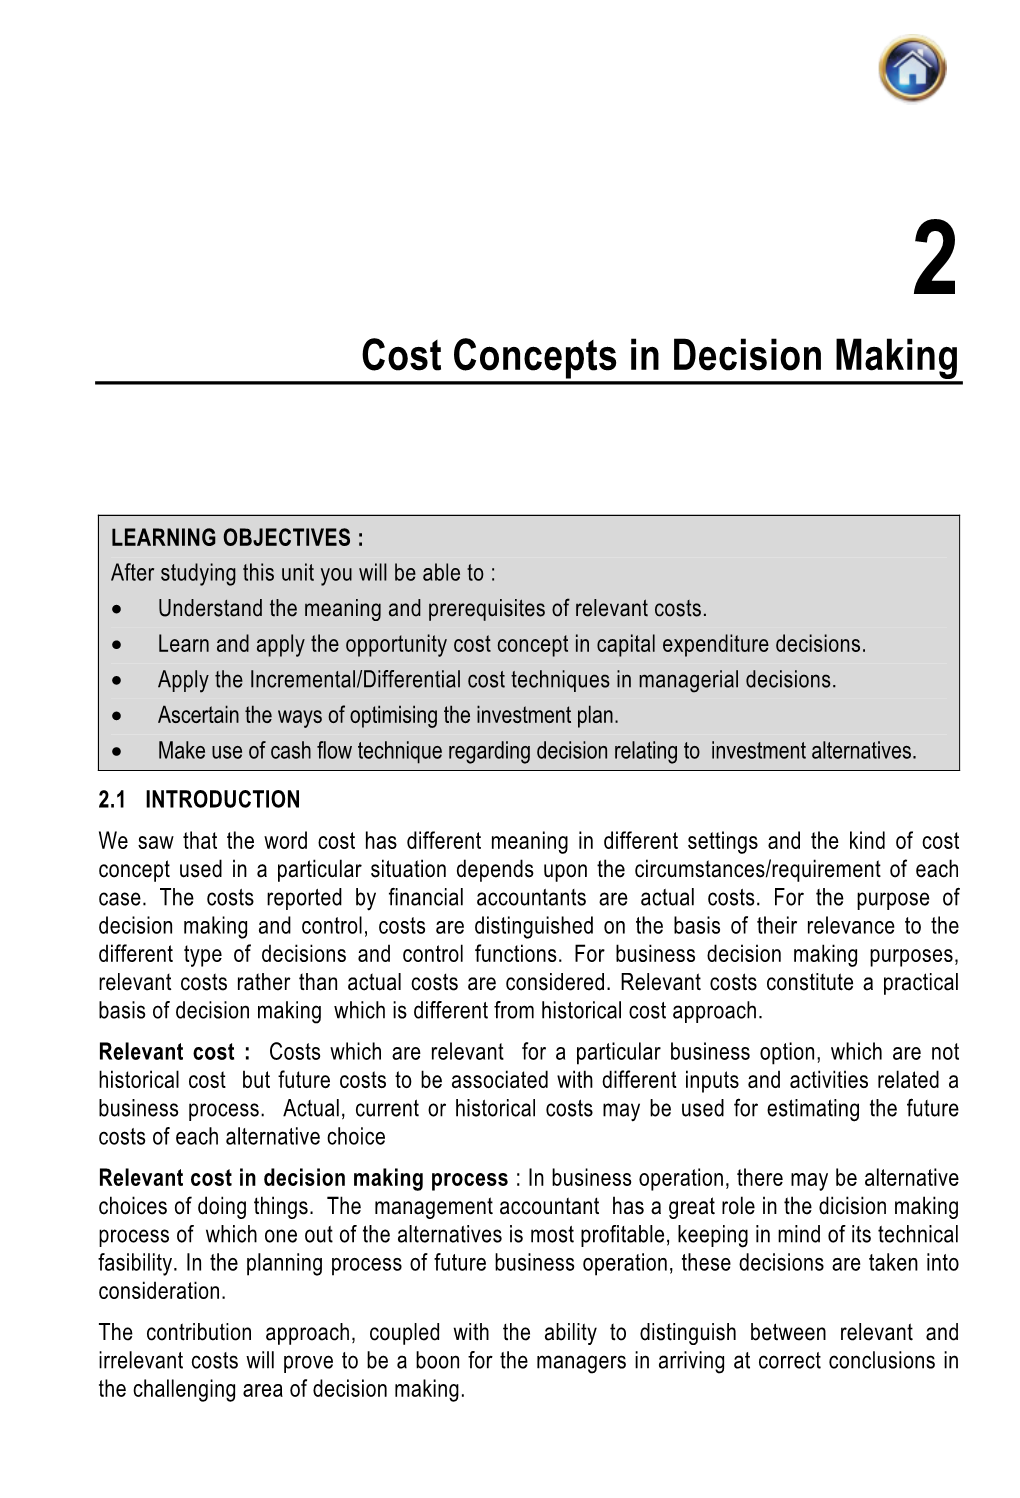 Cost Concepts in Decision Making